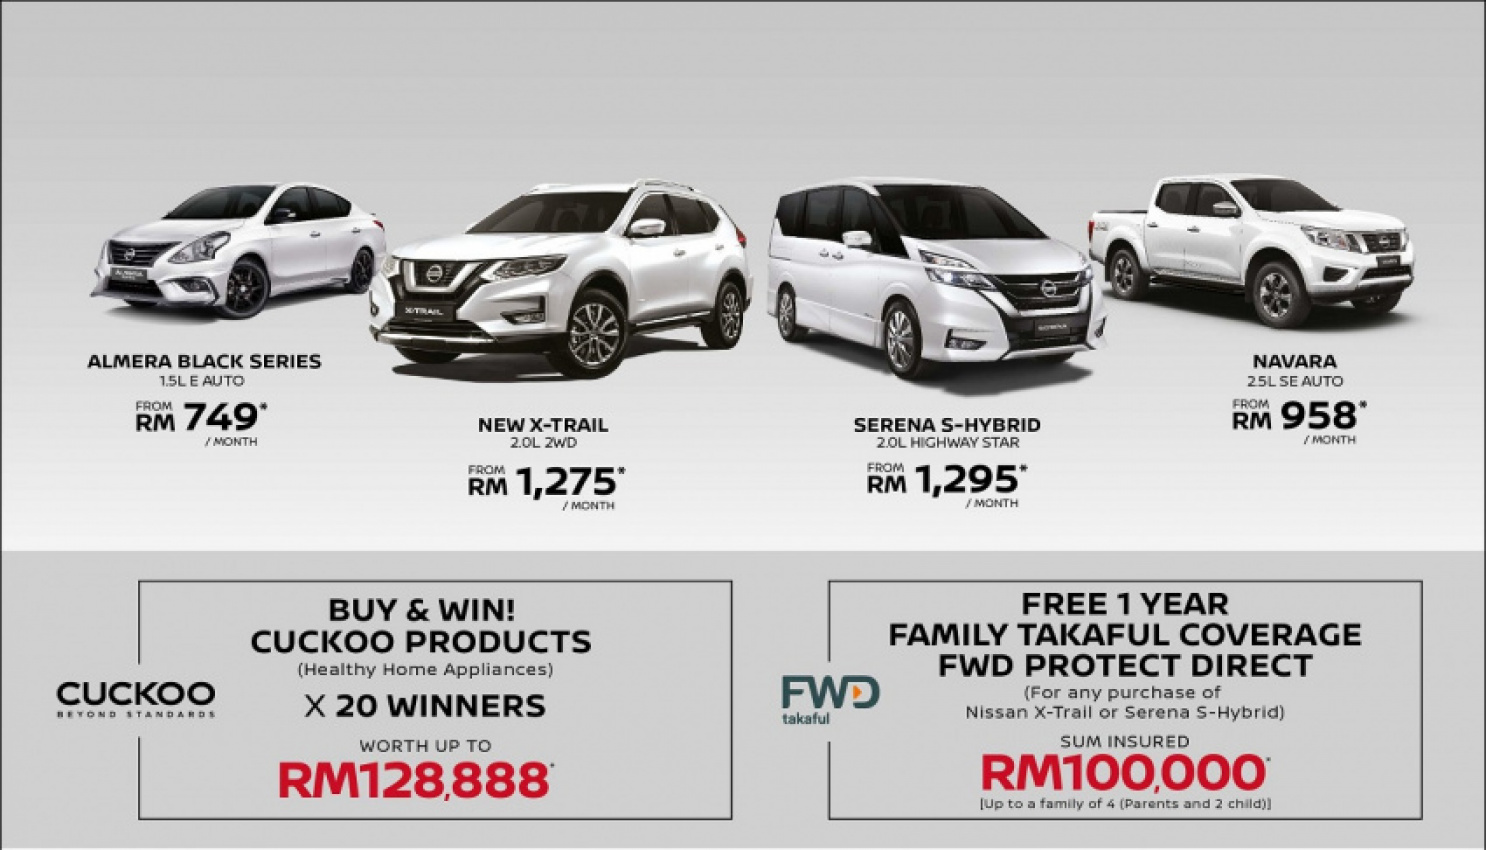 autos, car brands, cars, nissan, automotive, cars, edaran tan chong motor, etcm, fwd takaful, malaysia, nissan x-trail, pick up truck, promotions, sedan, complimentary 1 year family takaful protection plan for new nissan x-trail and serena s-hybrid buyers